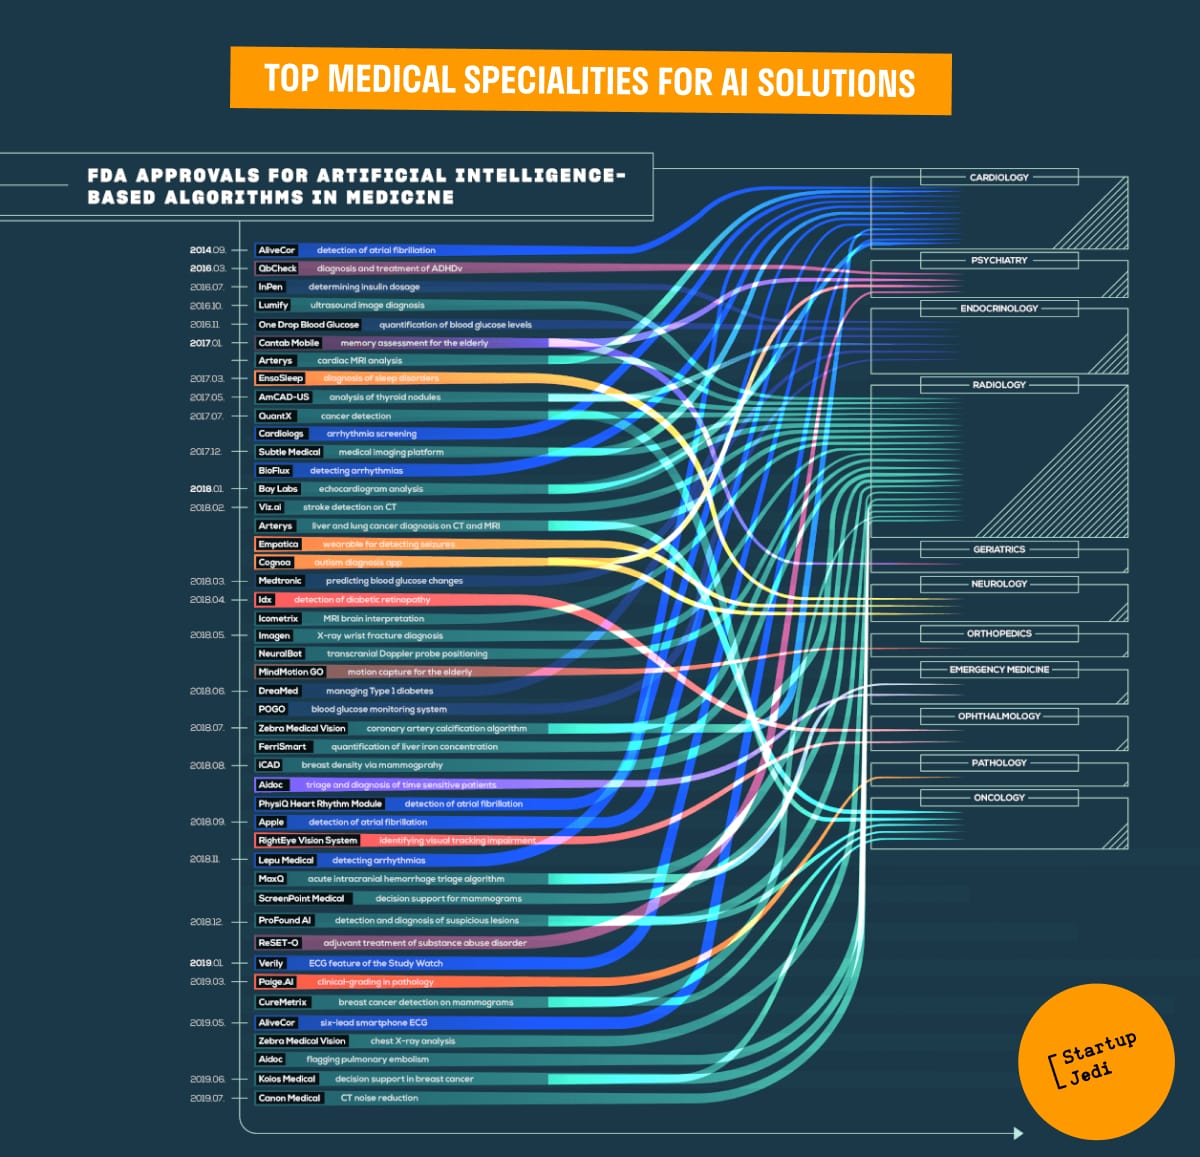 TOP MEDICAL SPECIALITIES FOR AI SOLUTIONS